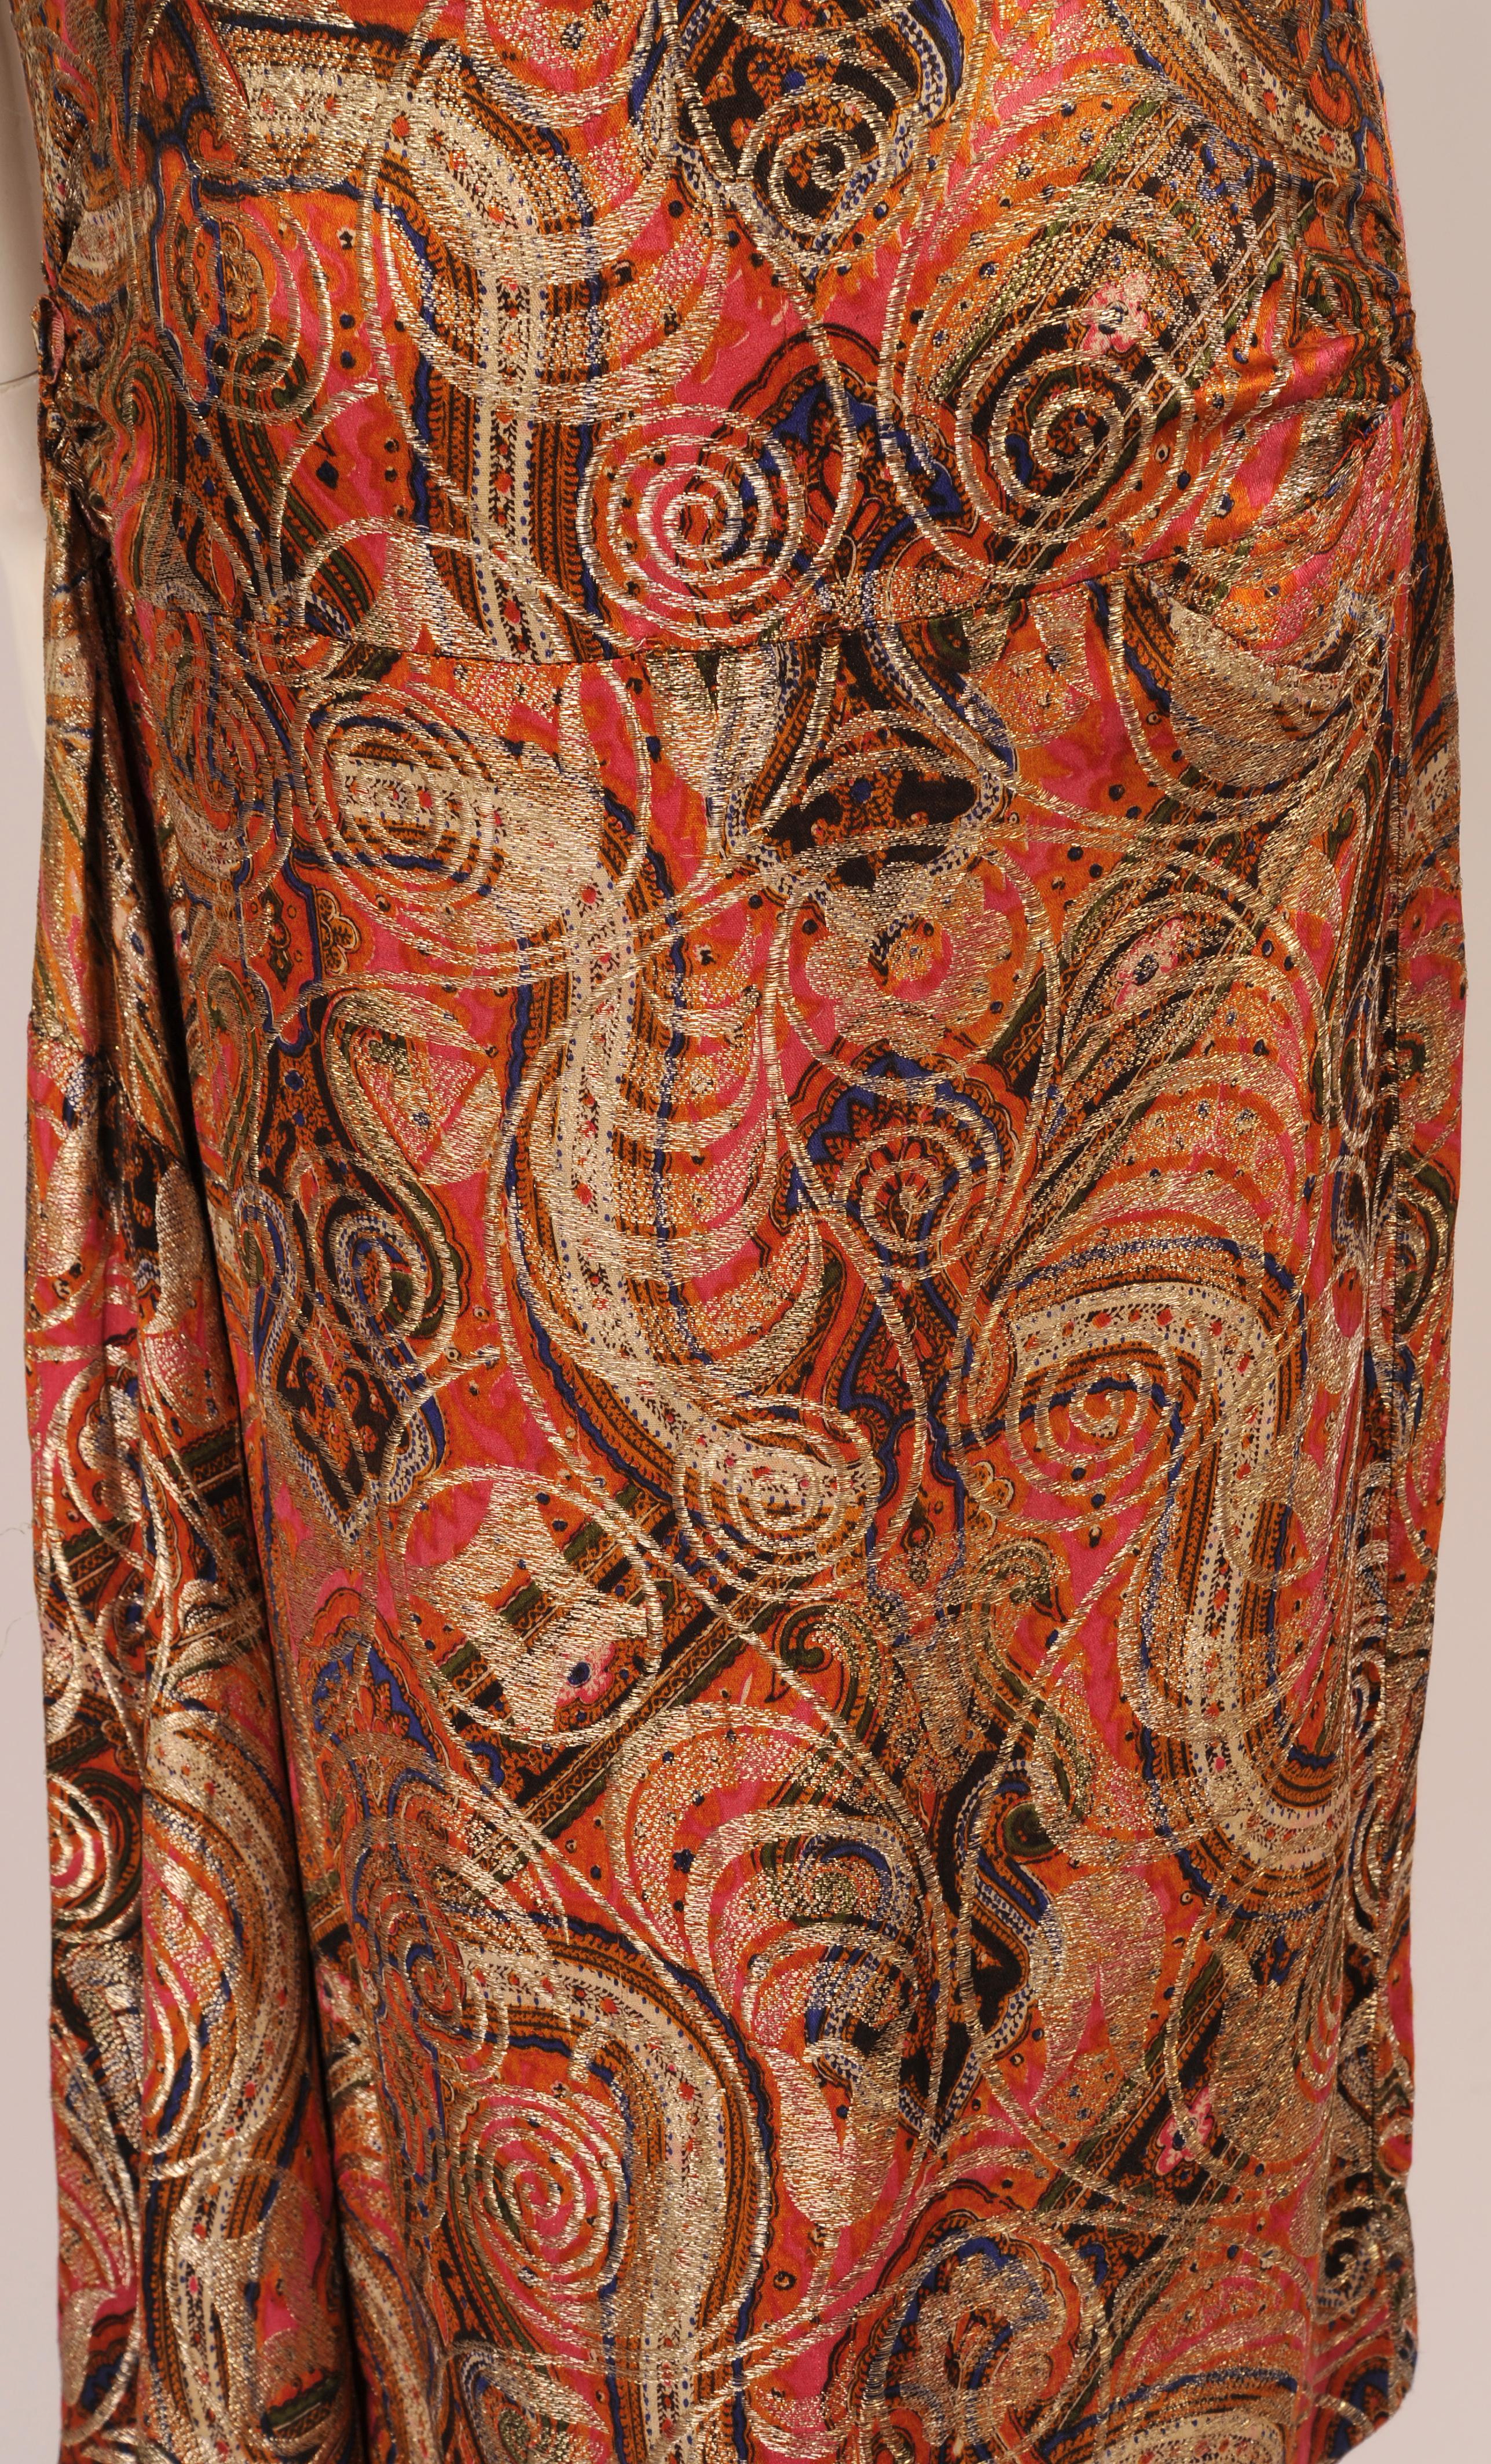 Women's 1920's Gold Lame Paisley Patterned Evening Dress